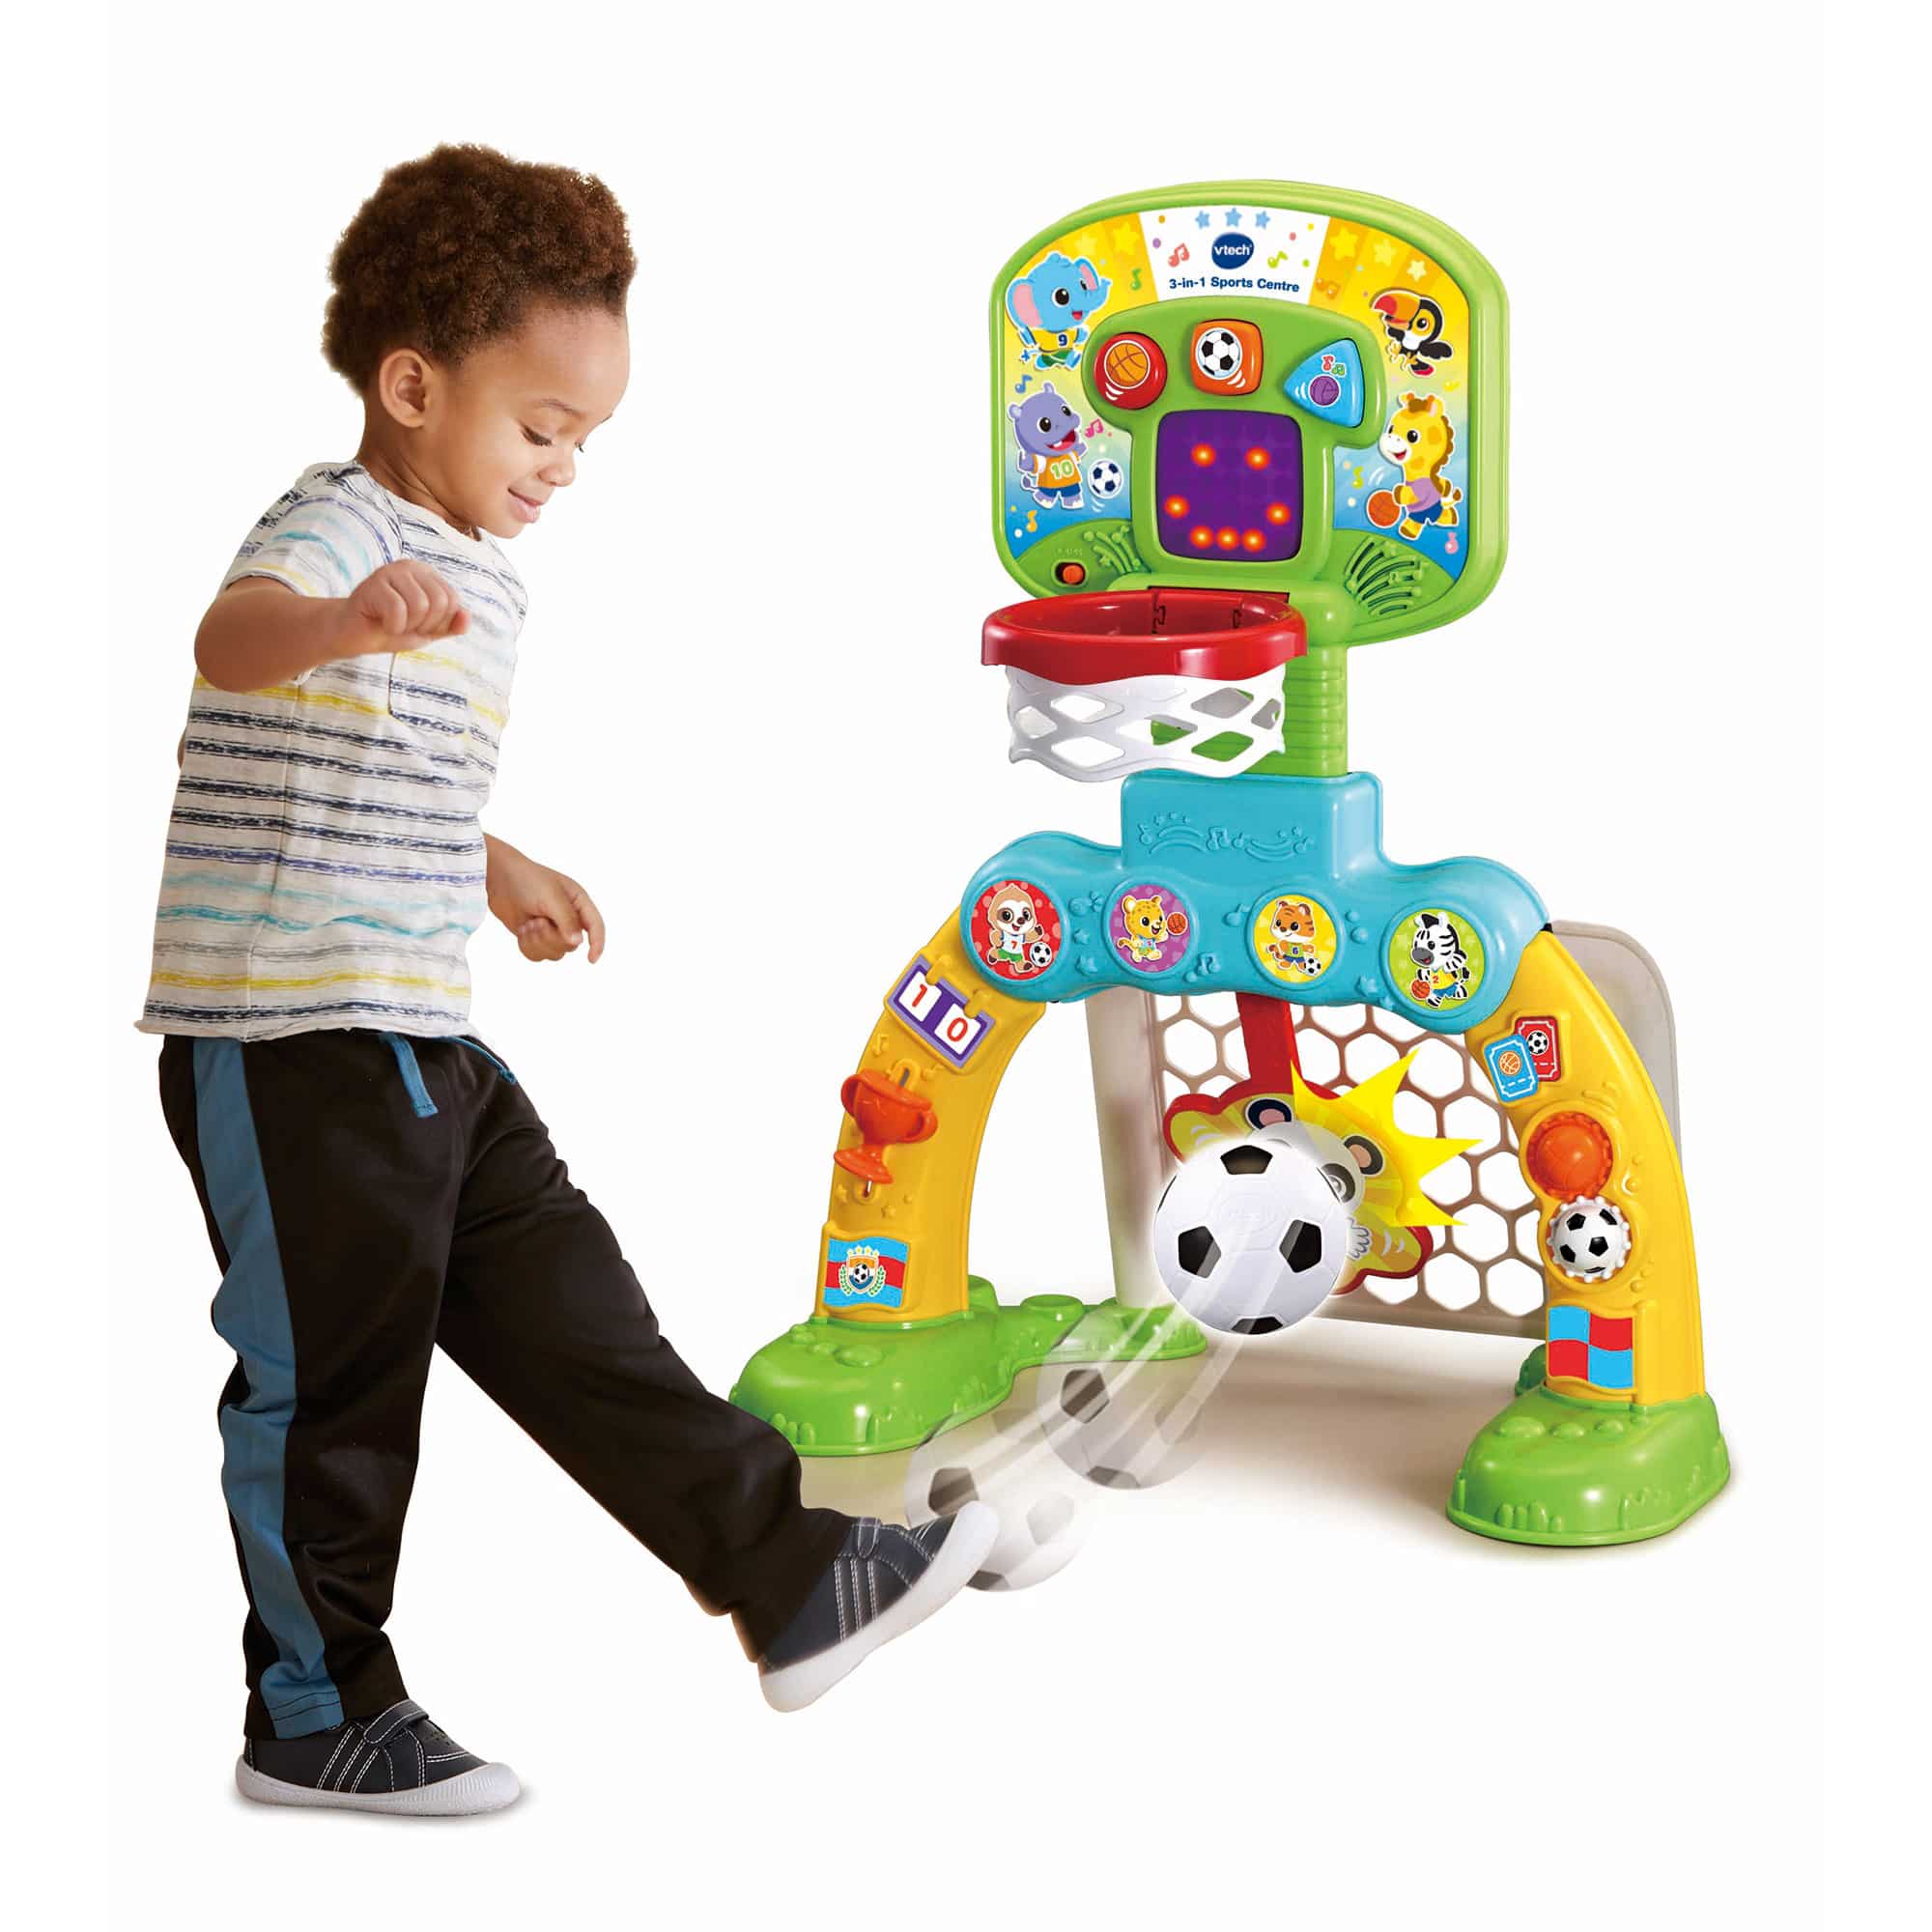 Vtech - 3-in-1 Sports Centre